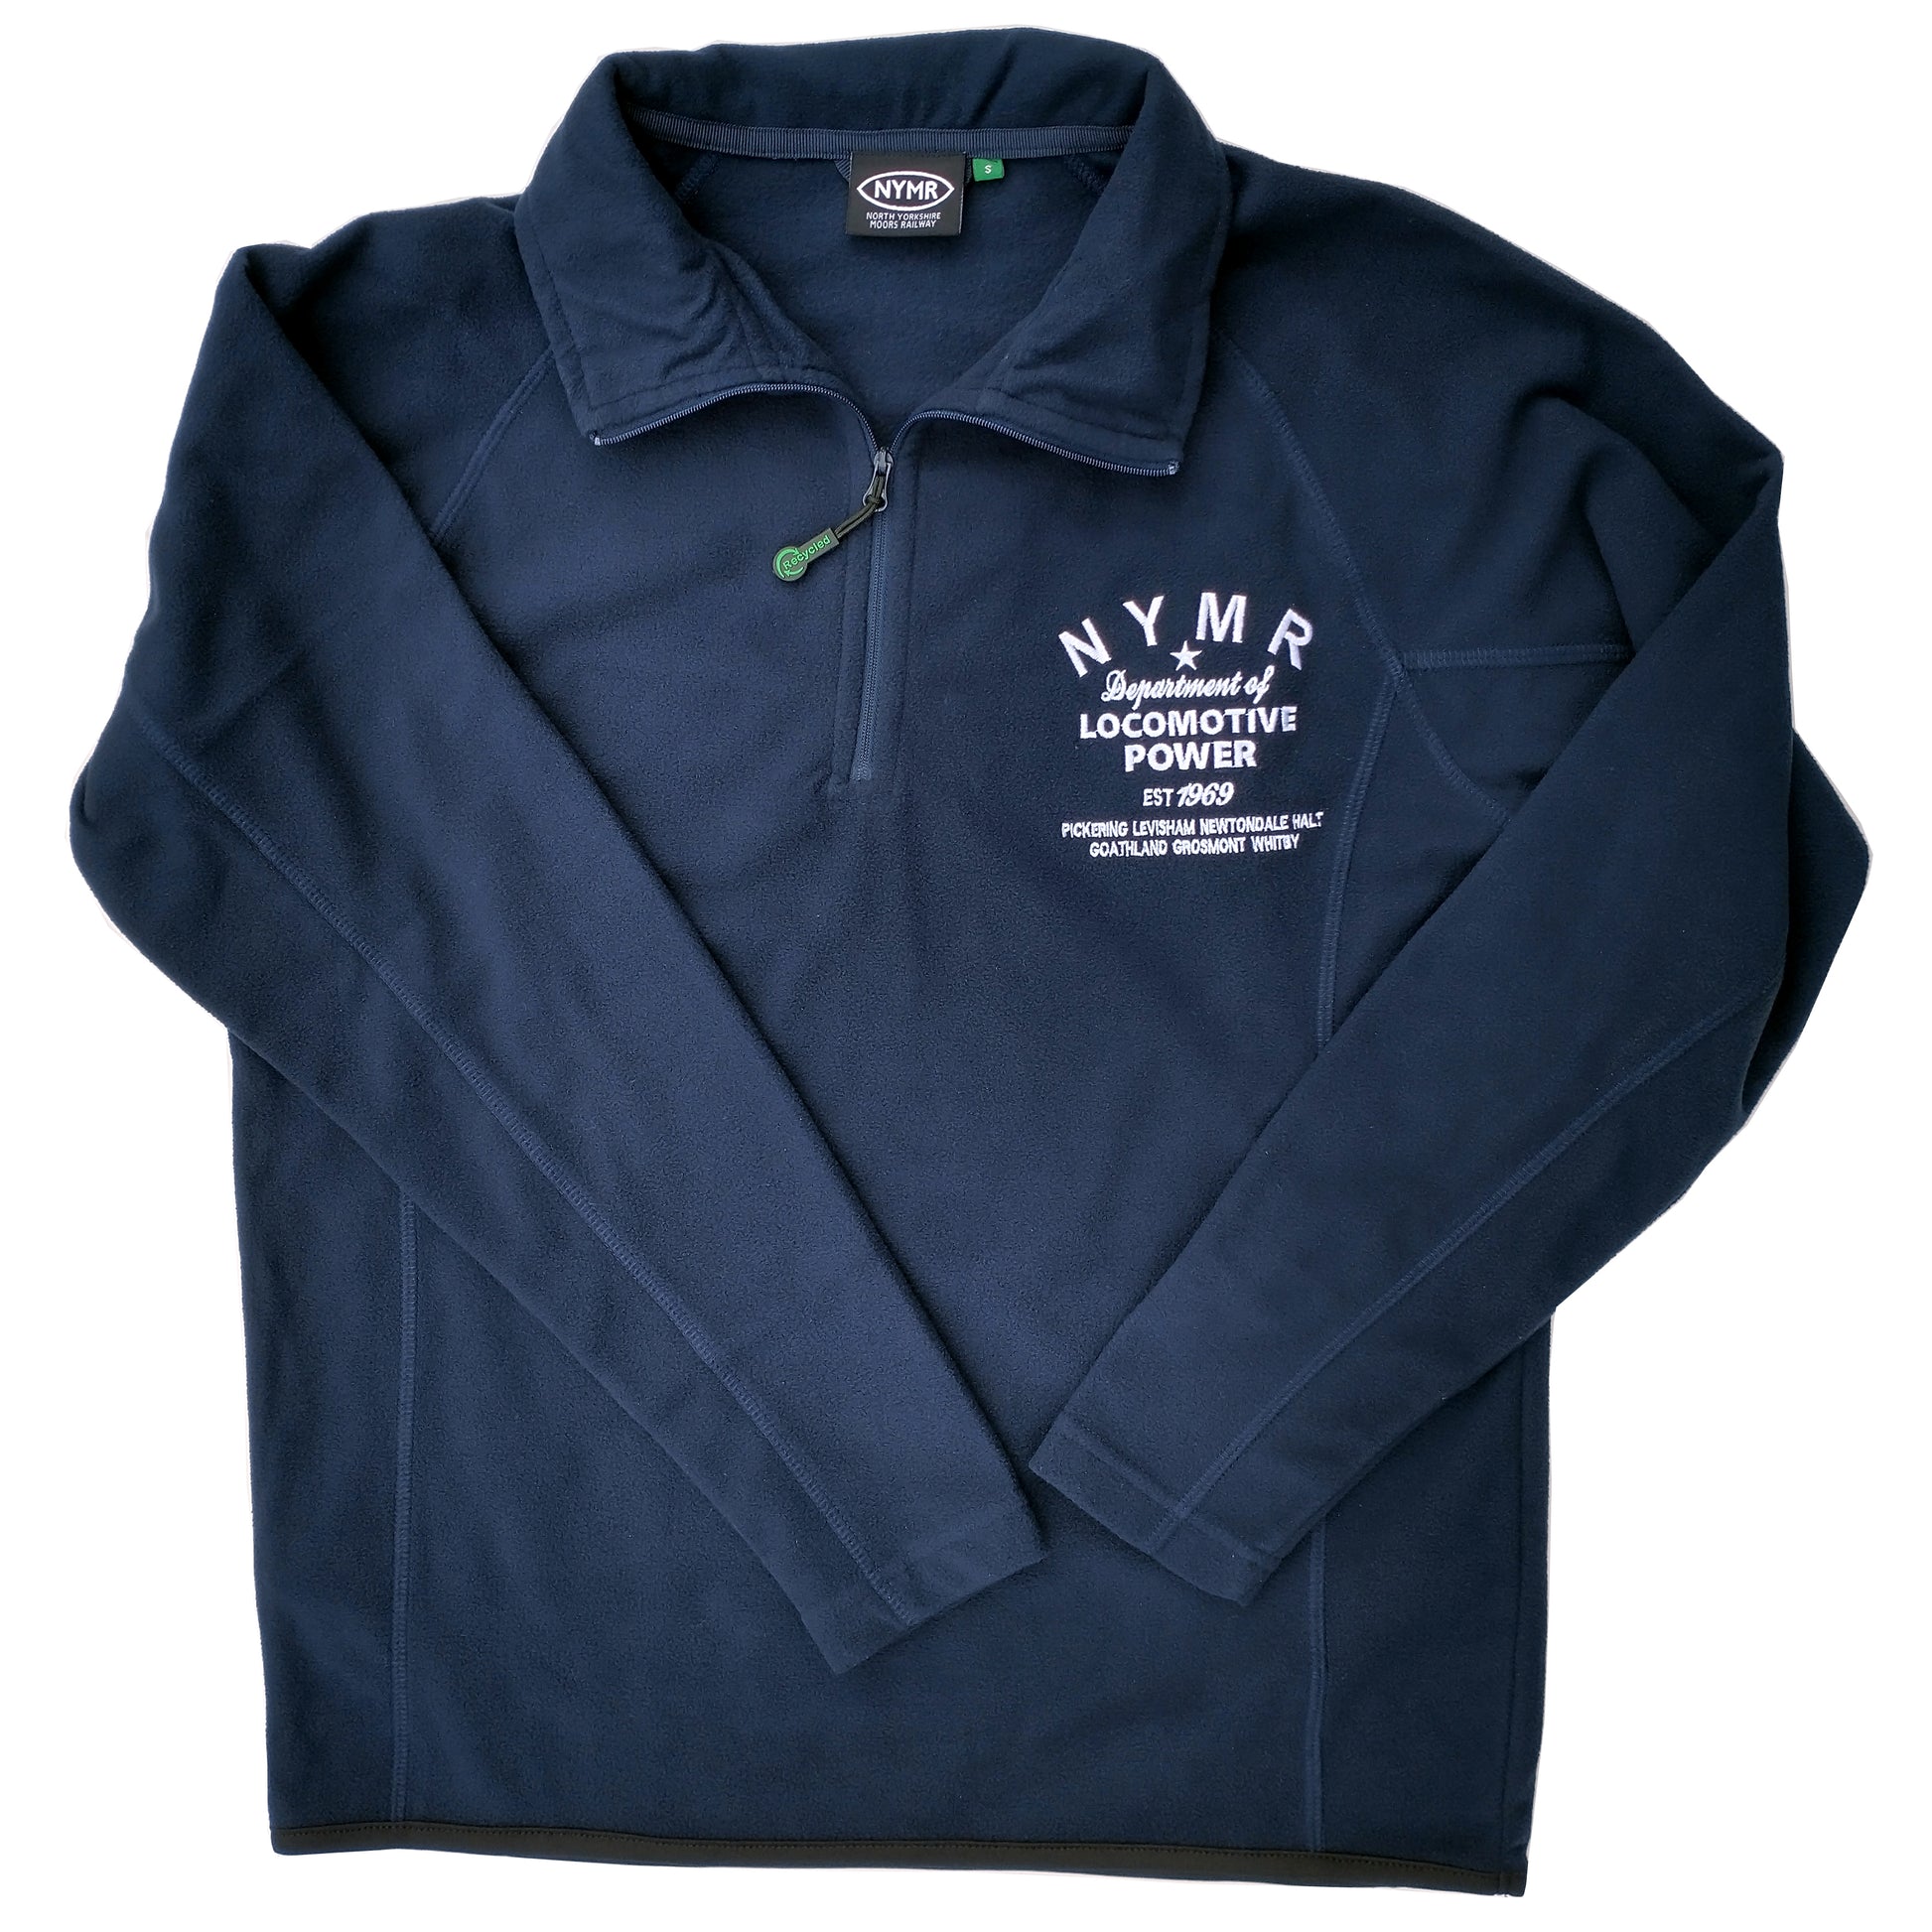 Navy collared micro fleece with short zip and N Y M R Locomotive Power logo embroidered in white on left front.